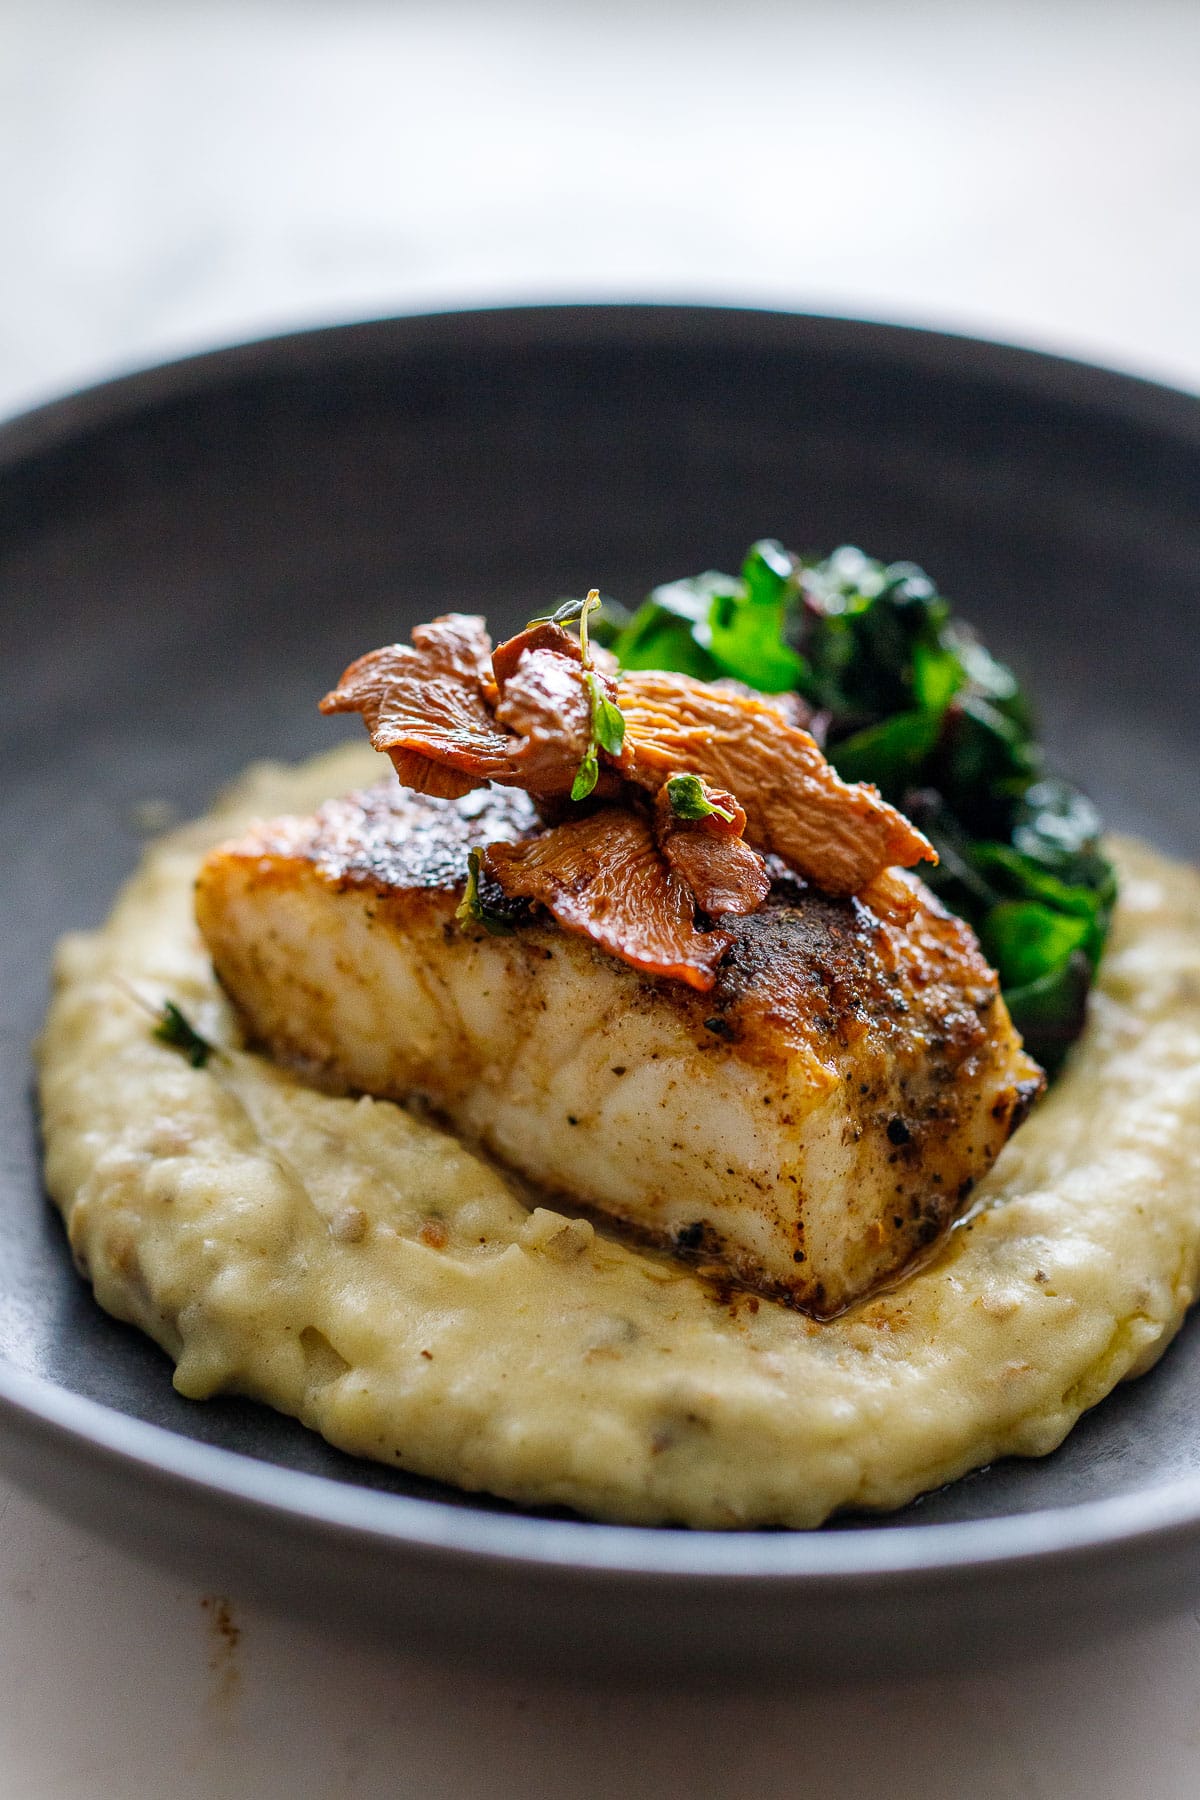 halibut coated in mushroom powder and pan seared, topped with sautéed mushrooms over sunchoke puree in a bowl.